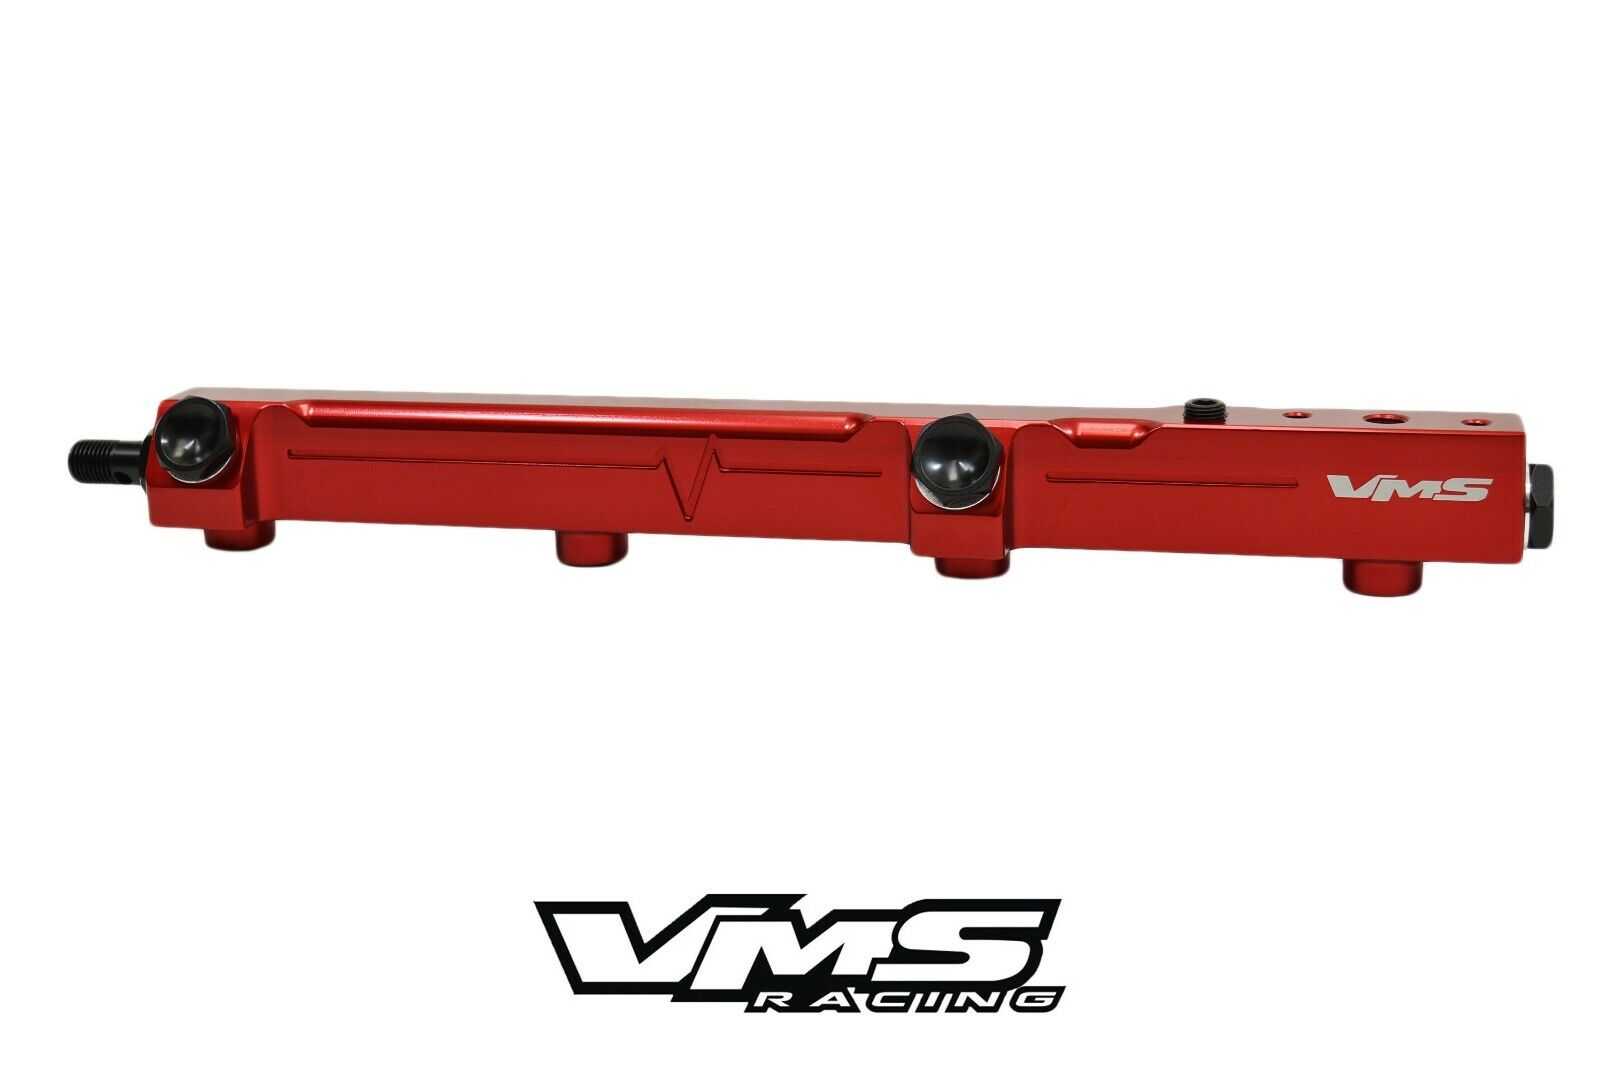 RED VMS RACING PRO FUEL RAIL KIT FOR 92-96 HONDA PRELUDE H23